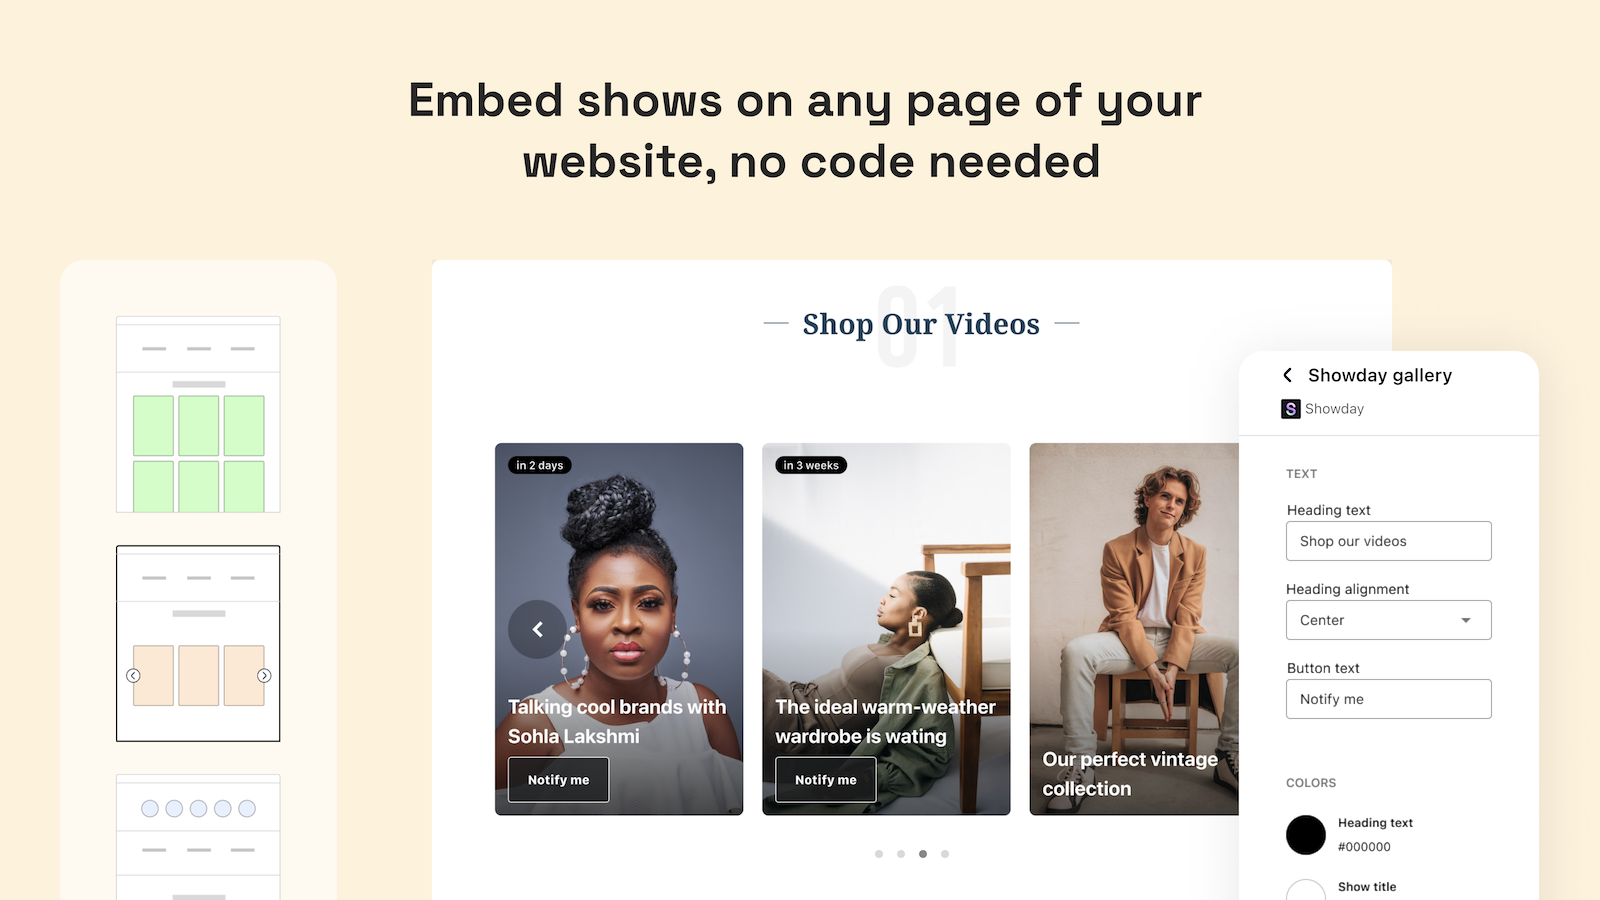 Showday: Embed shows on any page of your website, no code needed